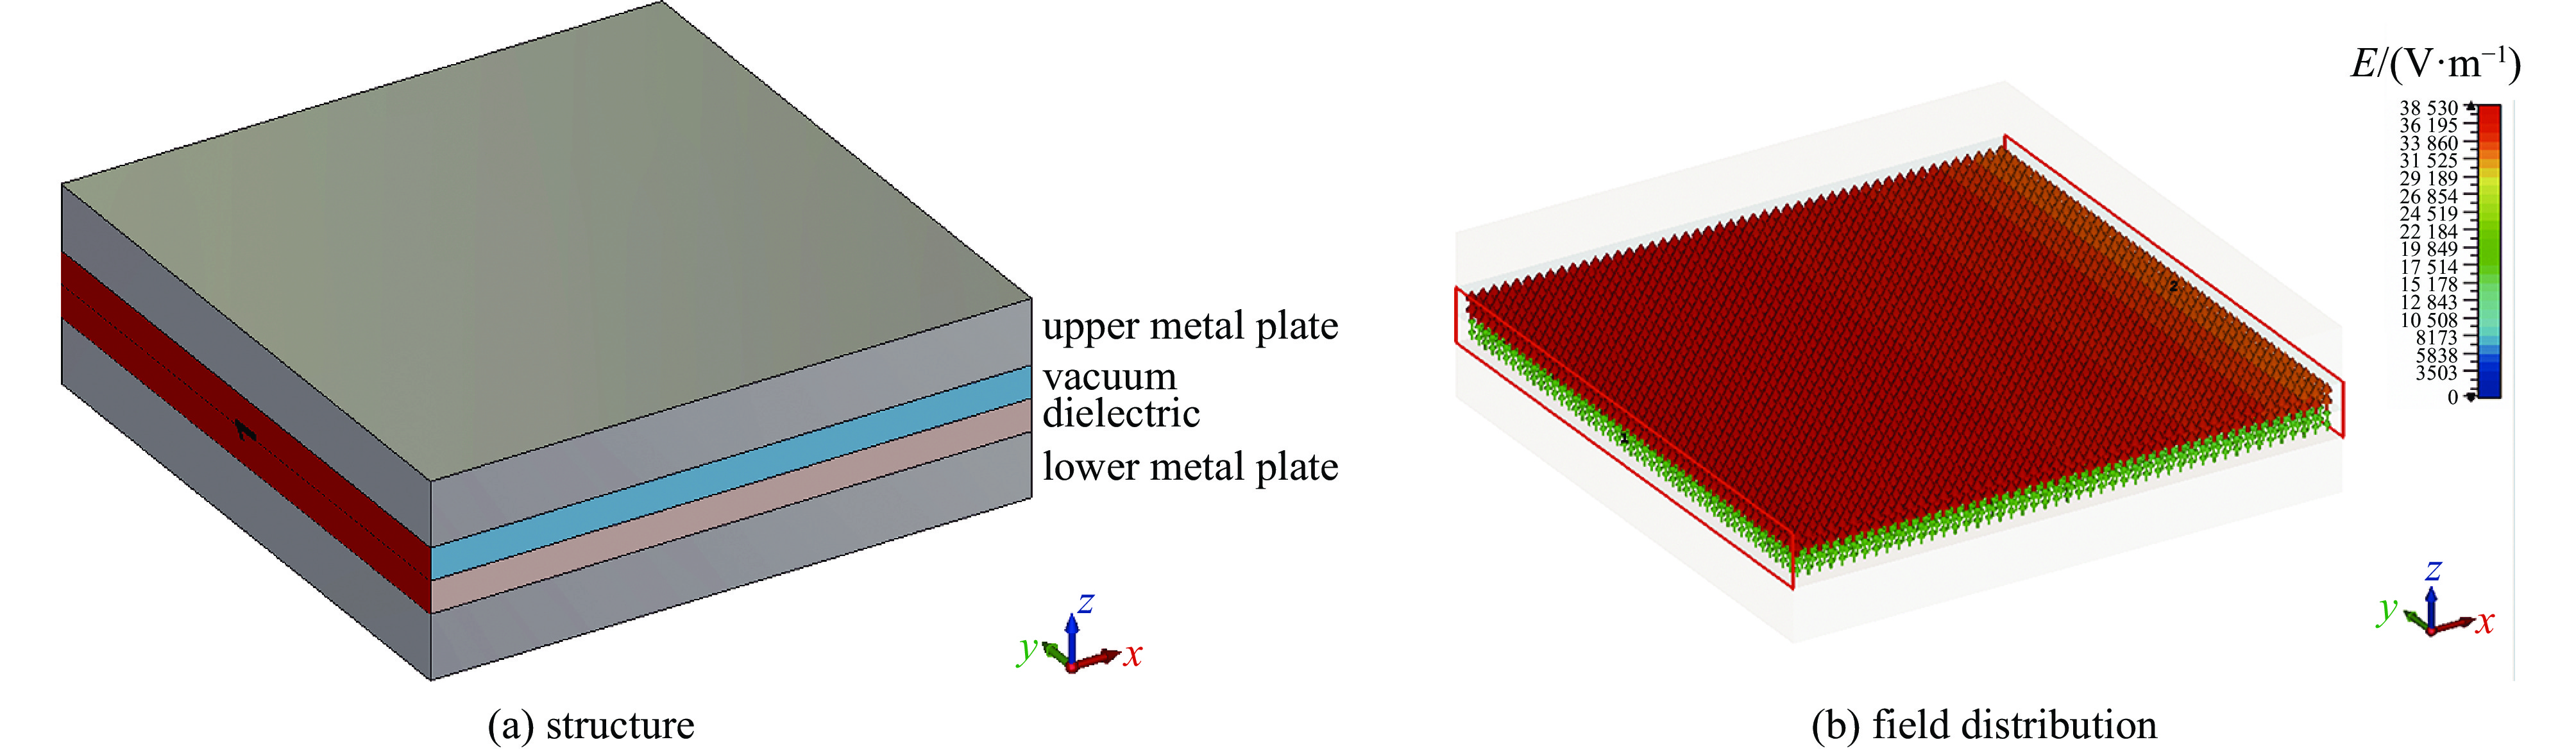 Structure and field distribution of a dielectric-loaded parallel-plate waveguide